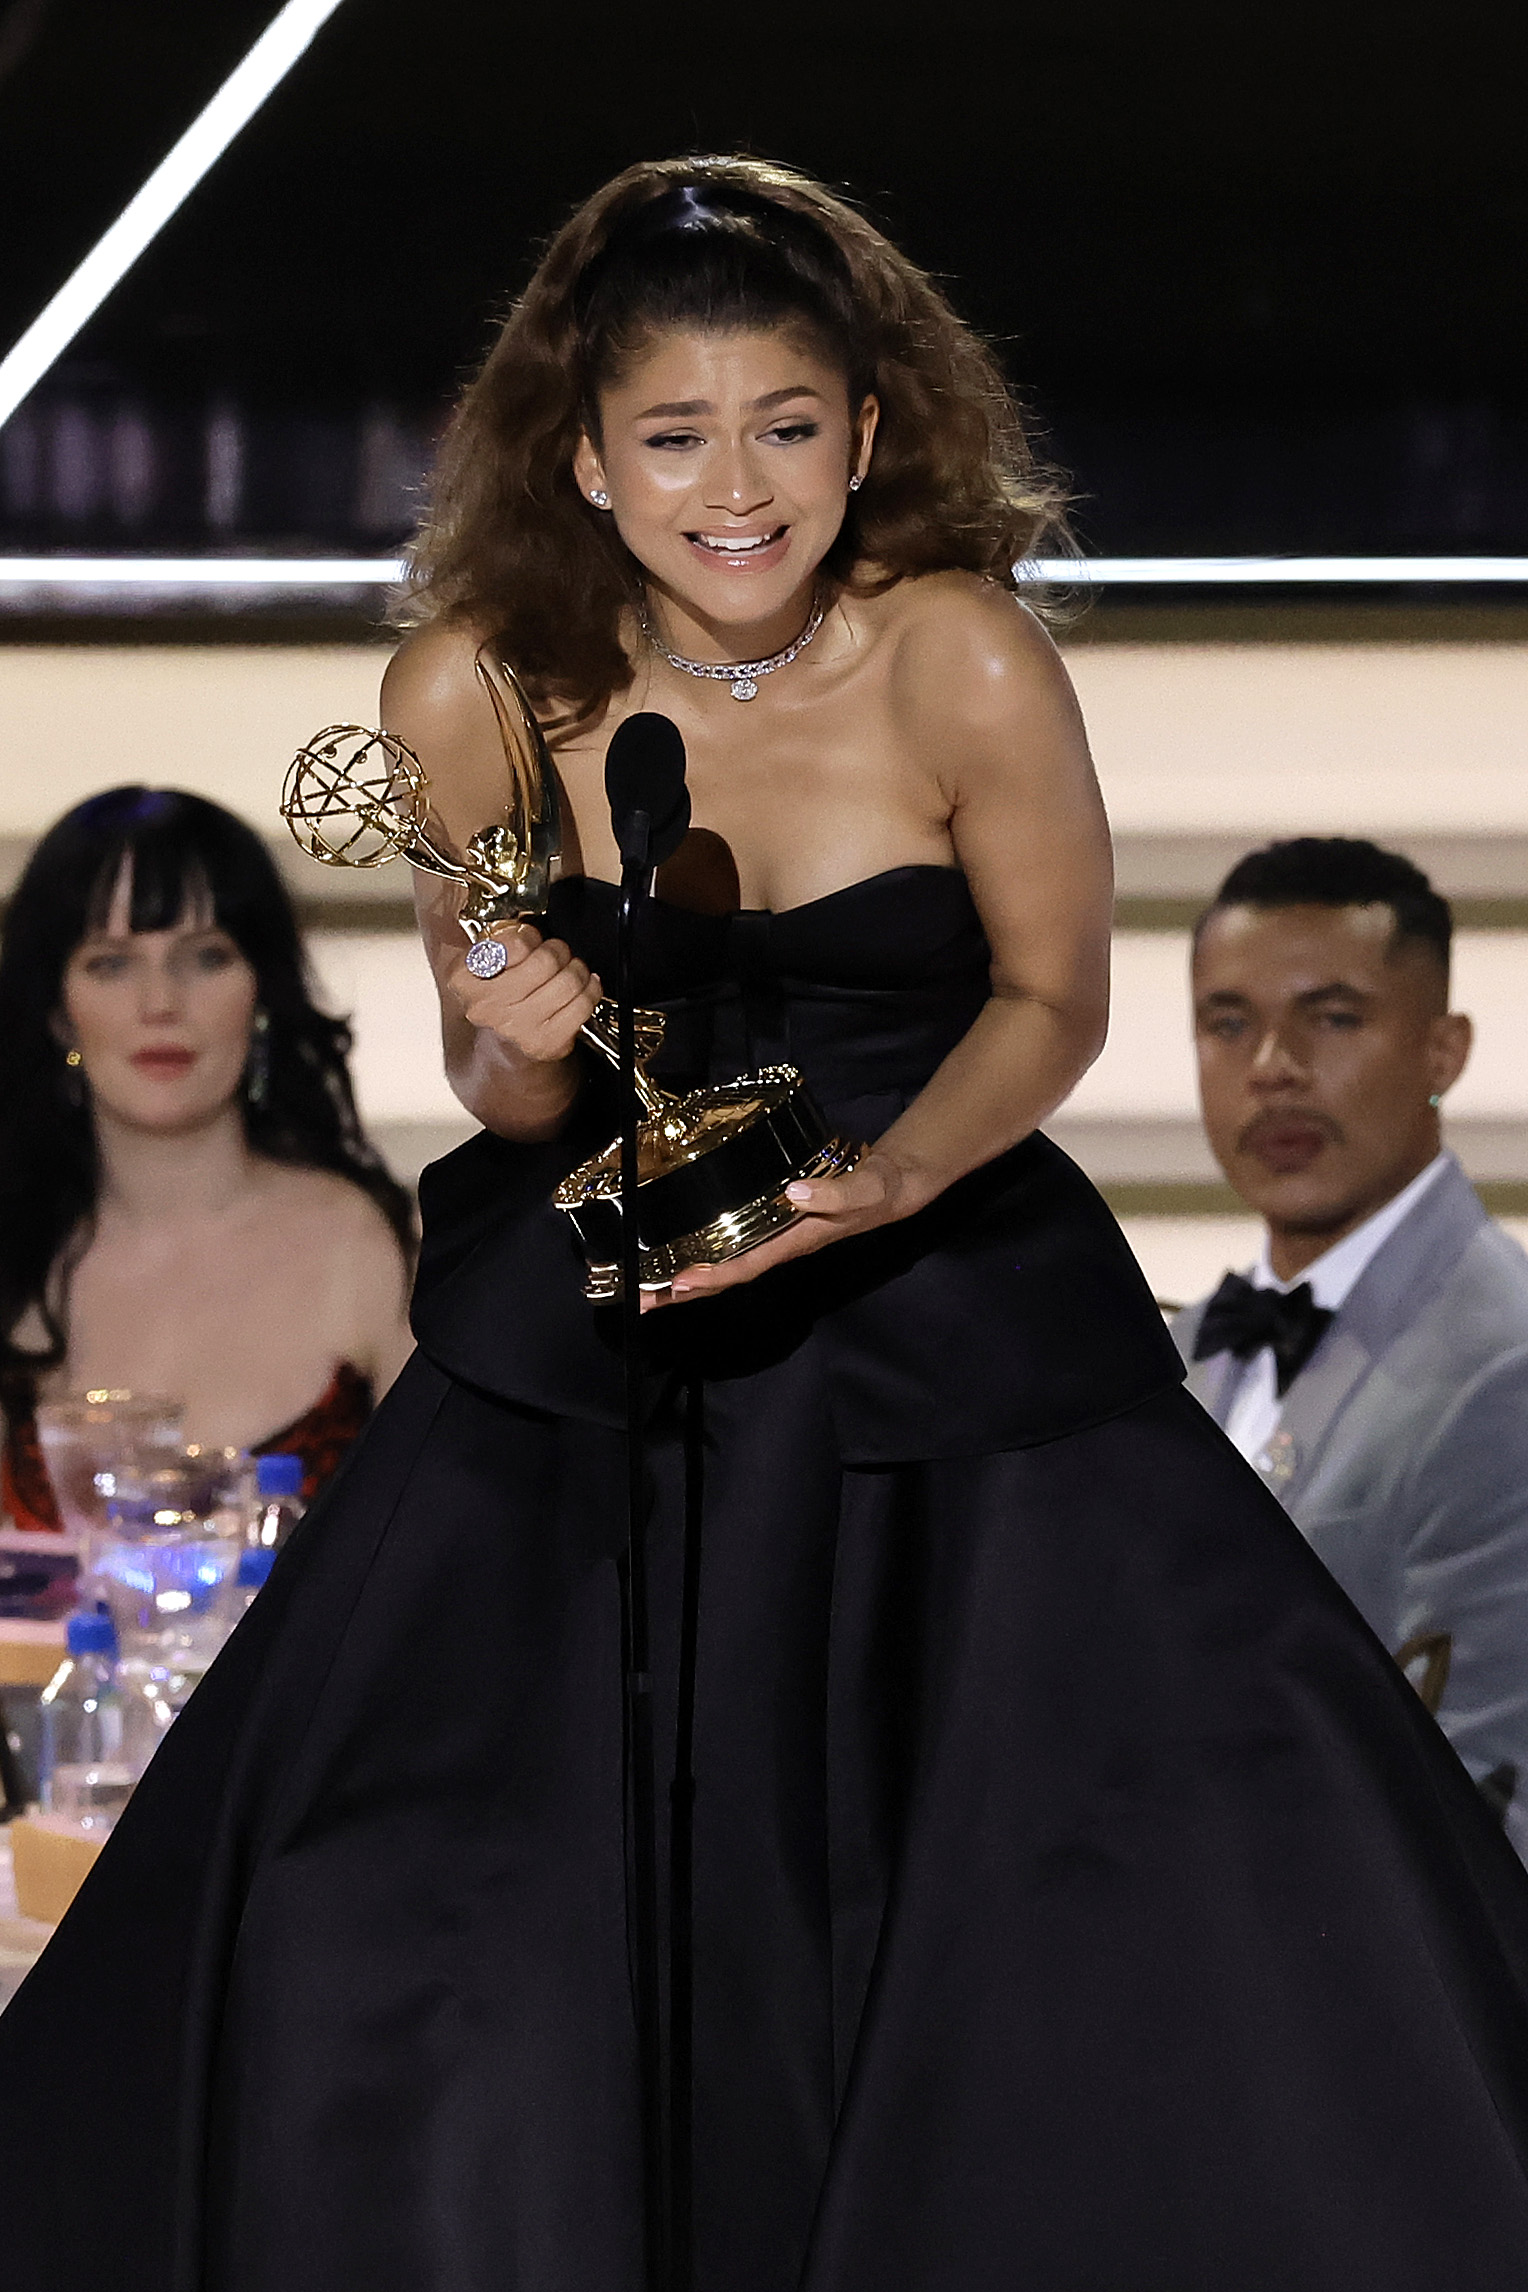 Zendaya accepts Outstanding Lead Actress in a Drama Series for "Euphoria" onstage during the 74th Primetime Emmys at Microsoft Theater in Los Angeles, California, on September 12, 2022. | Source: Getty Images